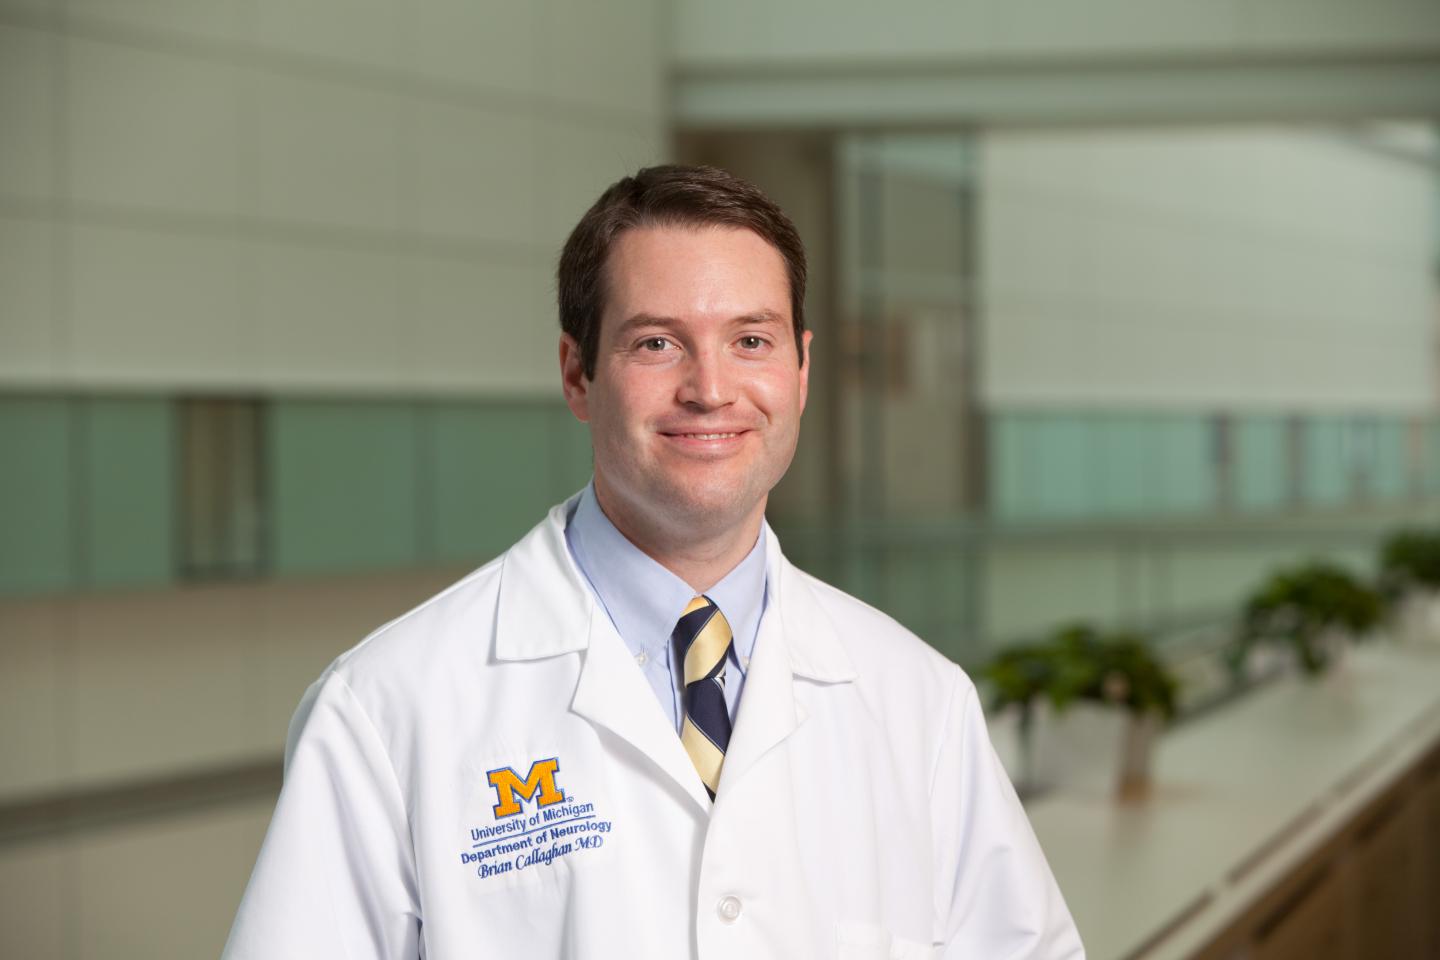 Brian Callaghan, M.D., M.S., University of Michigan Health System